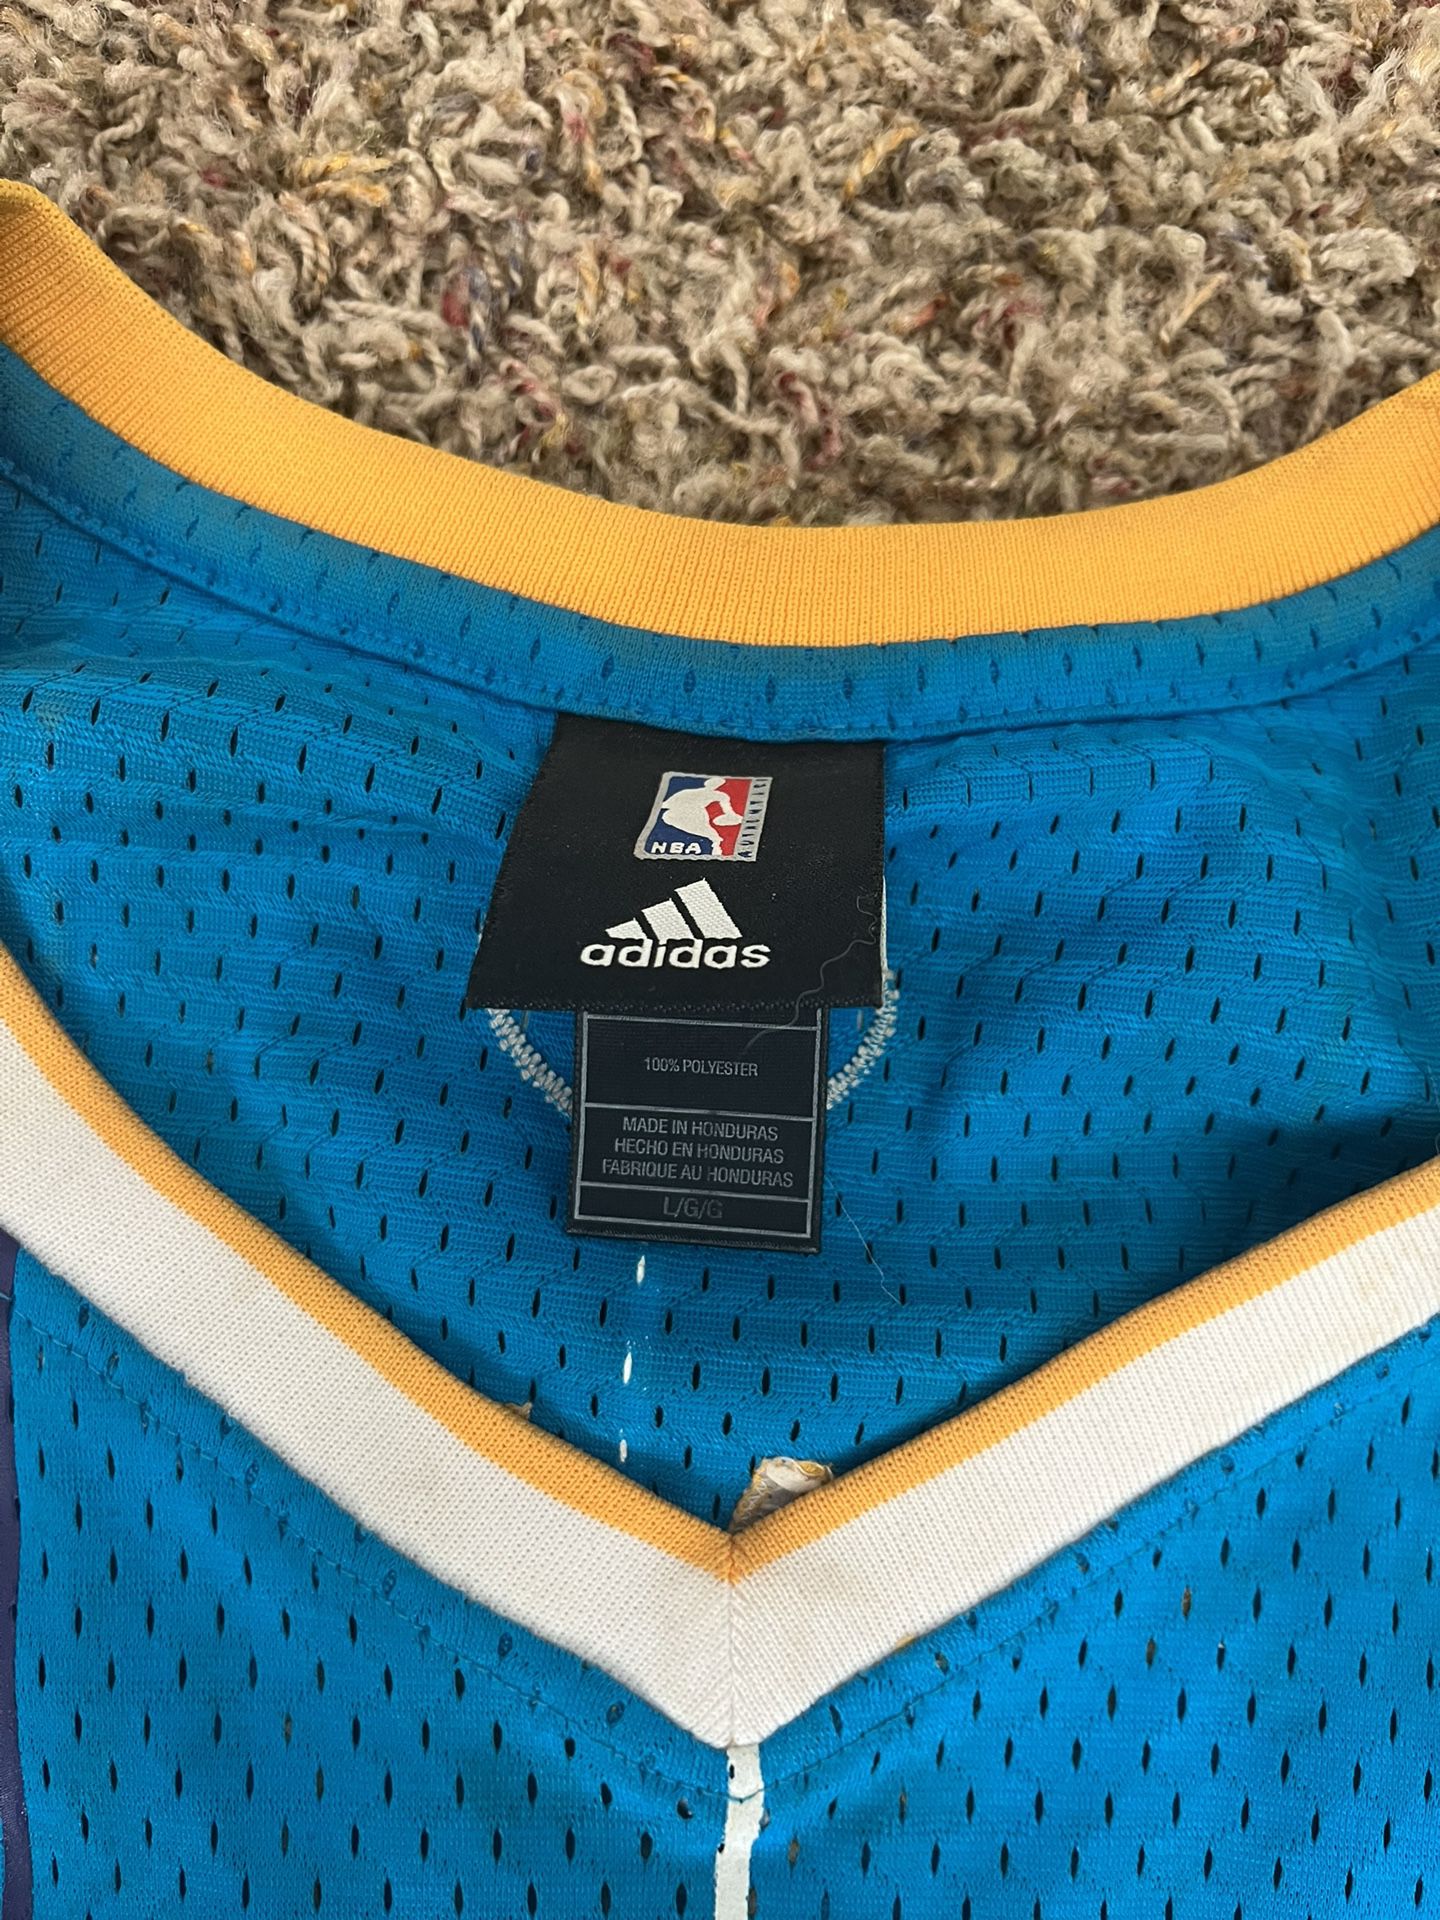 Retro Charlotte Hornets Chris Paul Jersey for Sale in Salem, OR - OfferUp